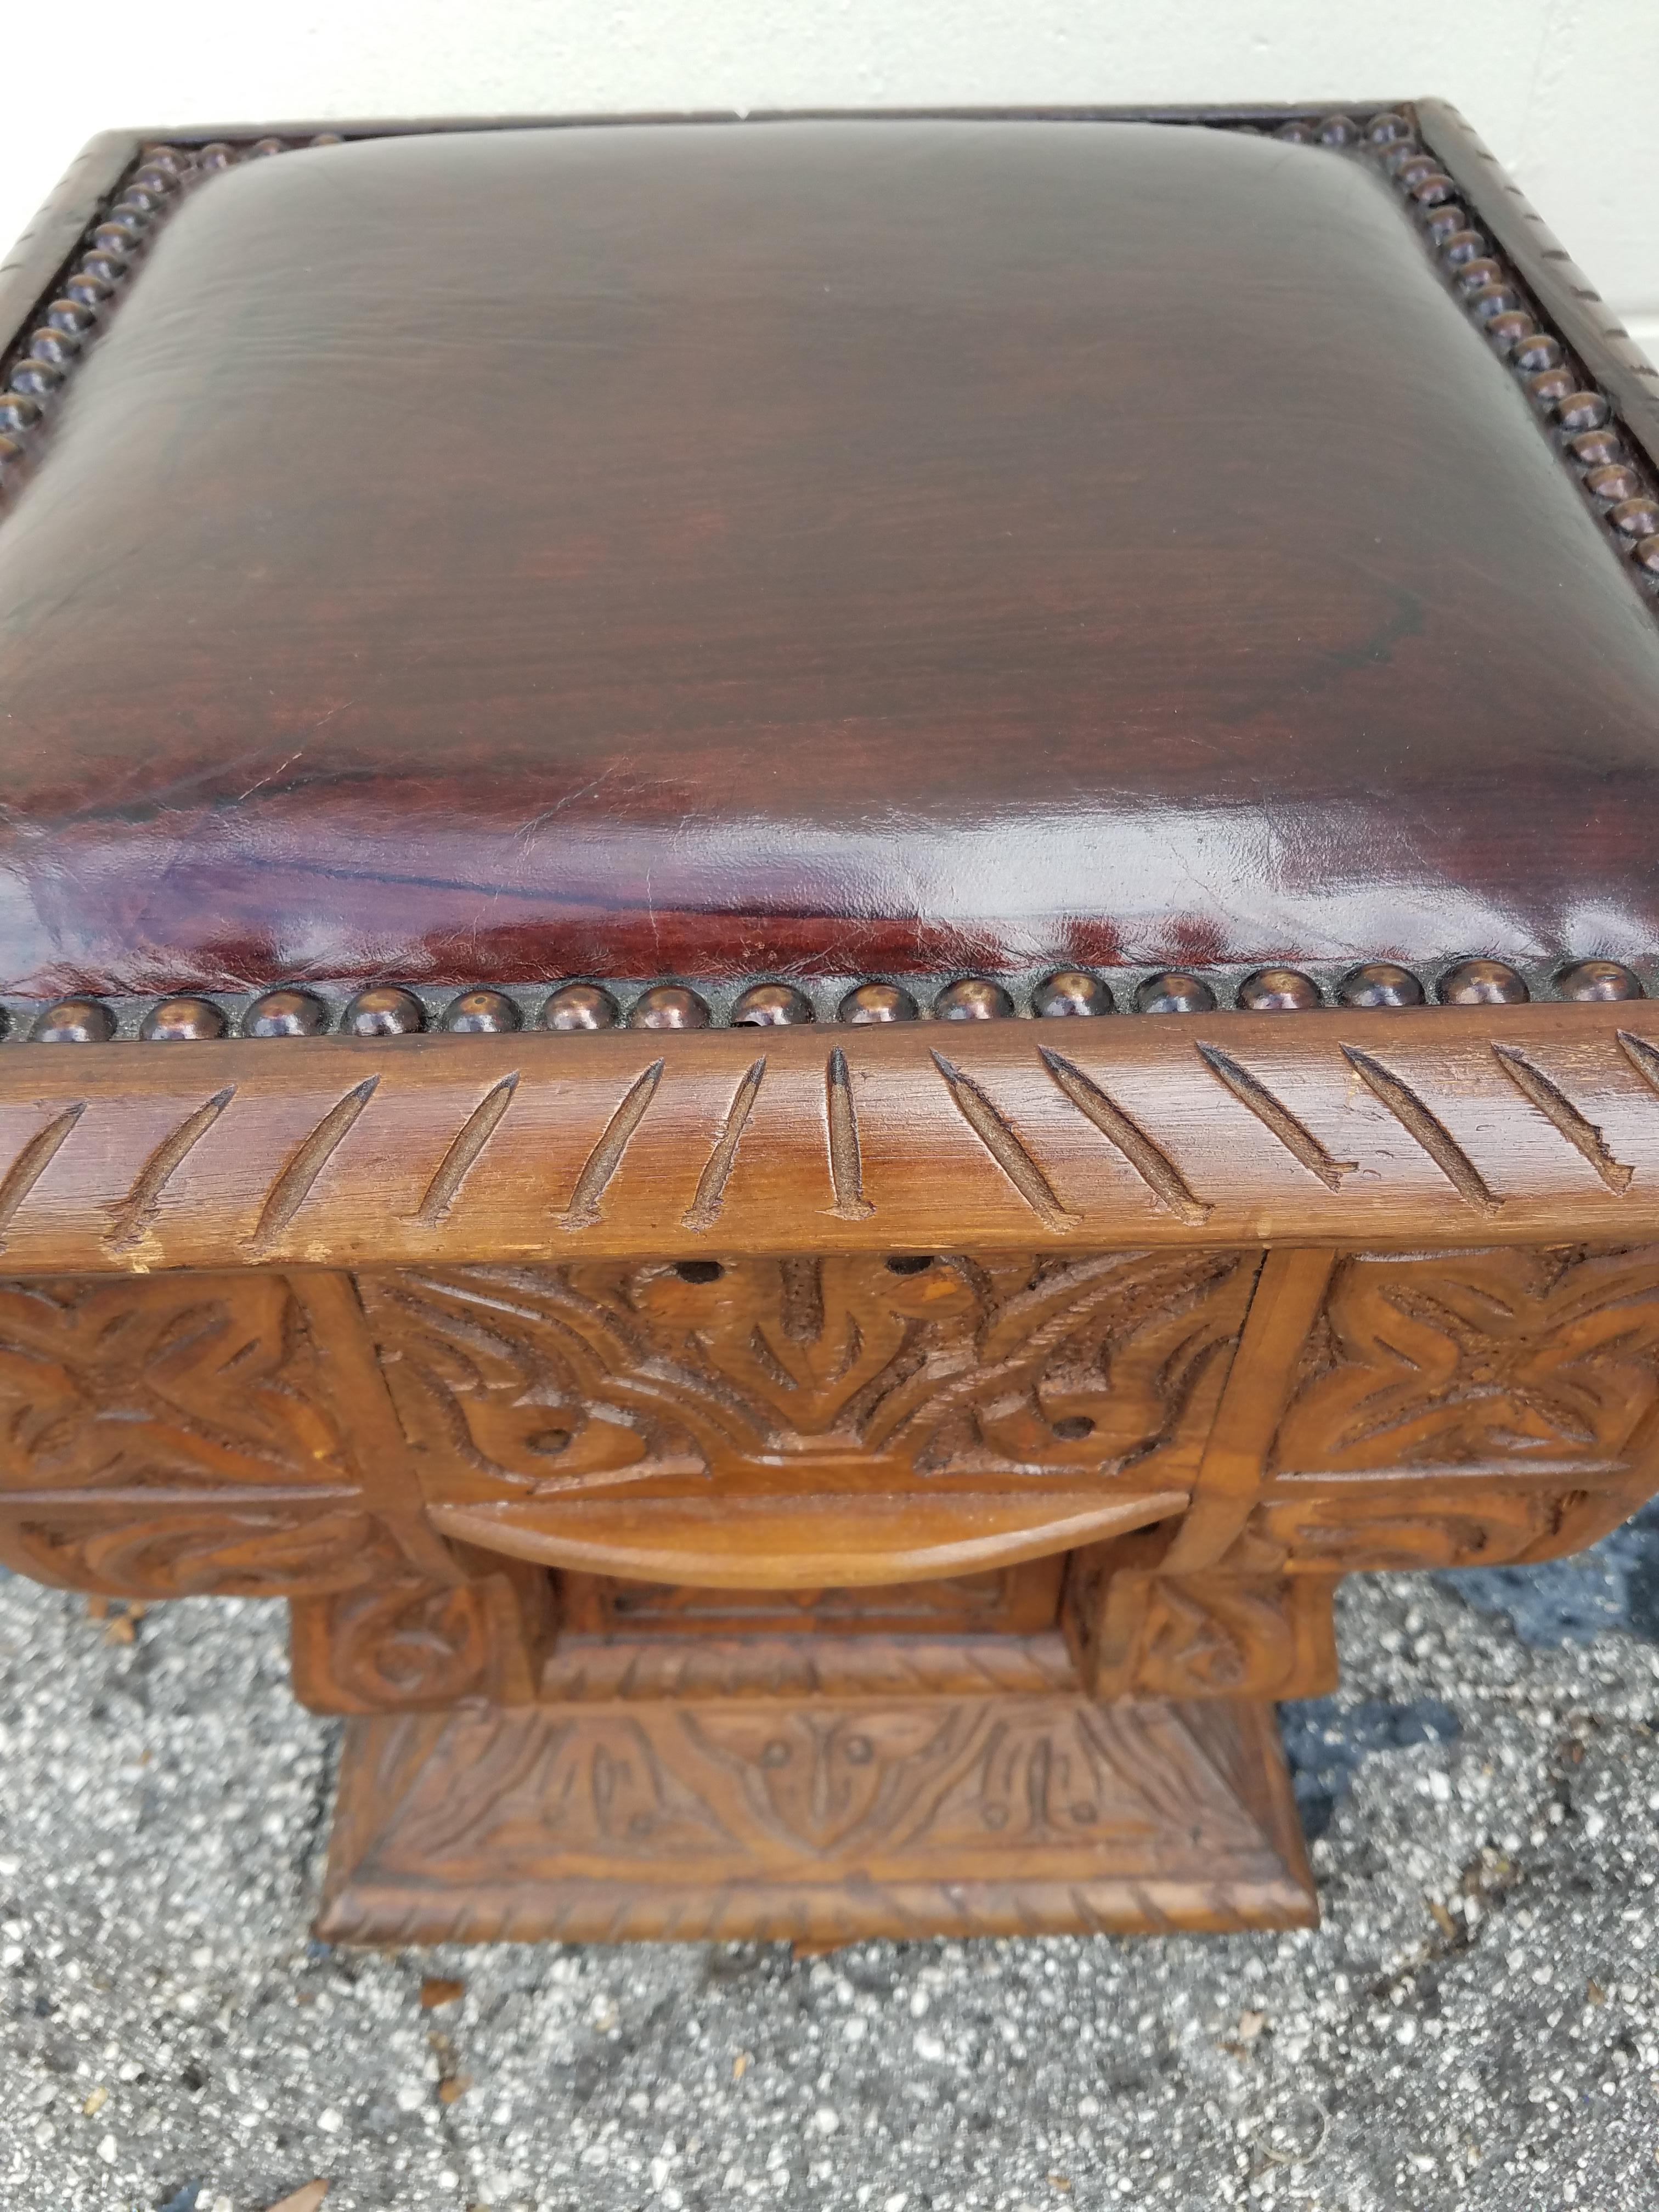 Handmade Moroccan Cedar Wood Stool, Leather Cushion In Excellent Condition For Sale In Orlando, FL